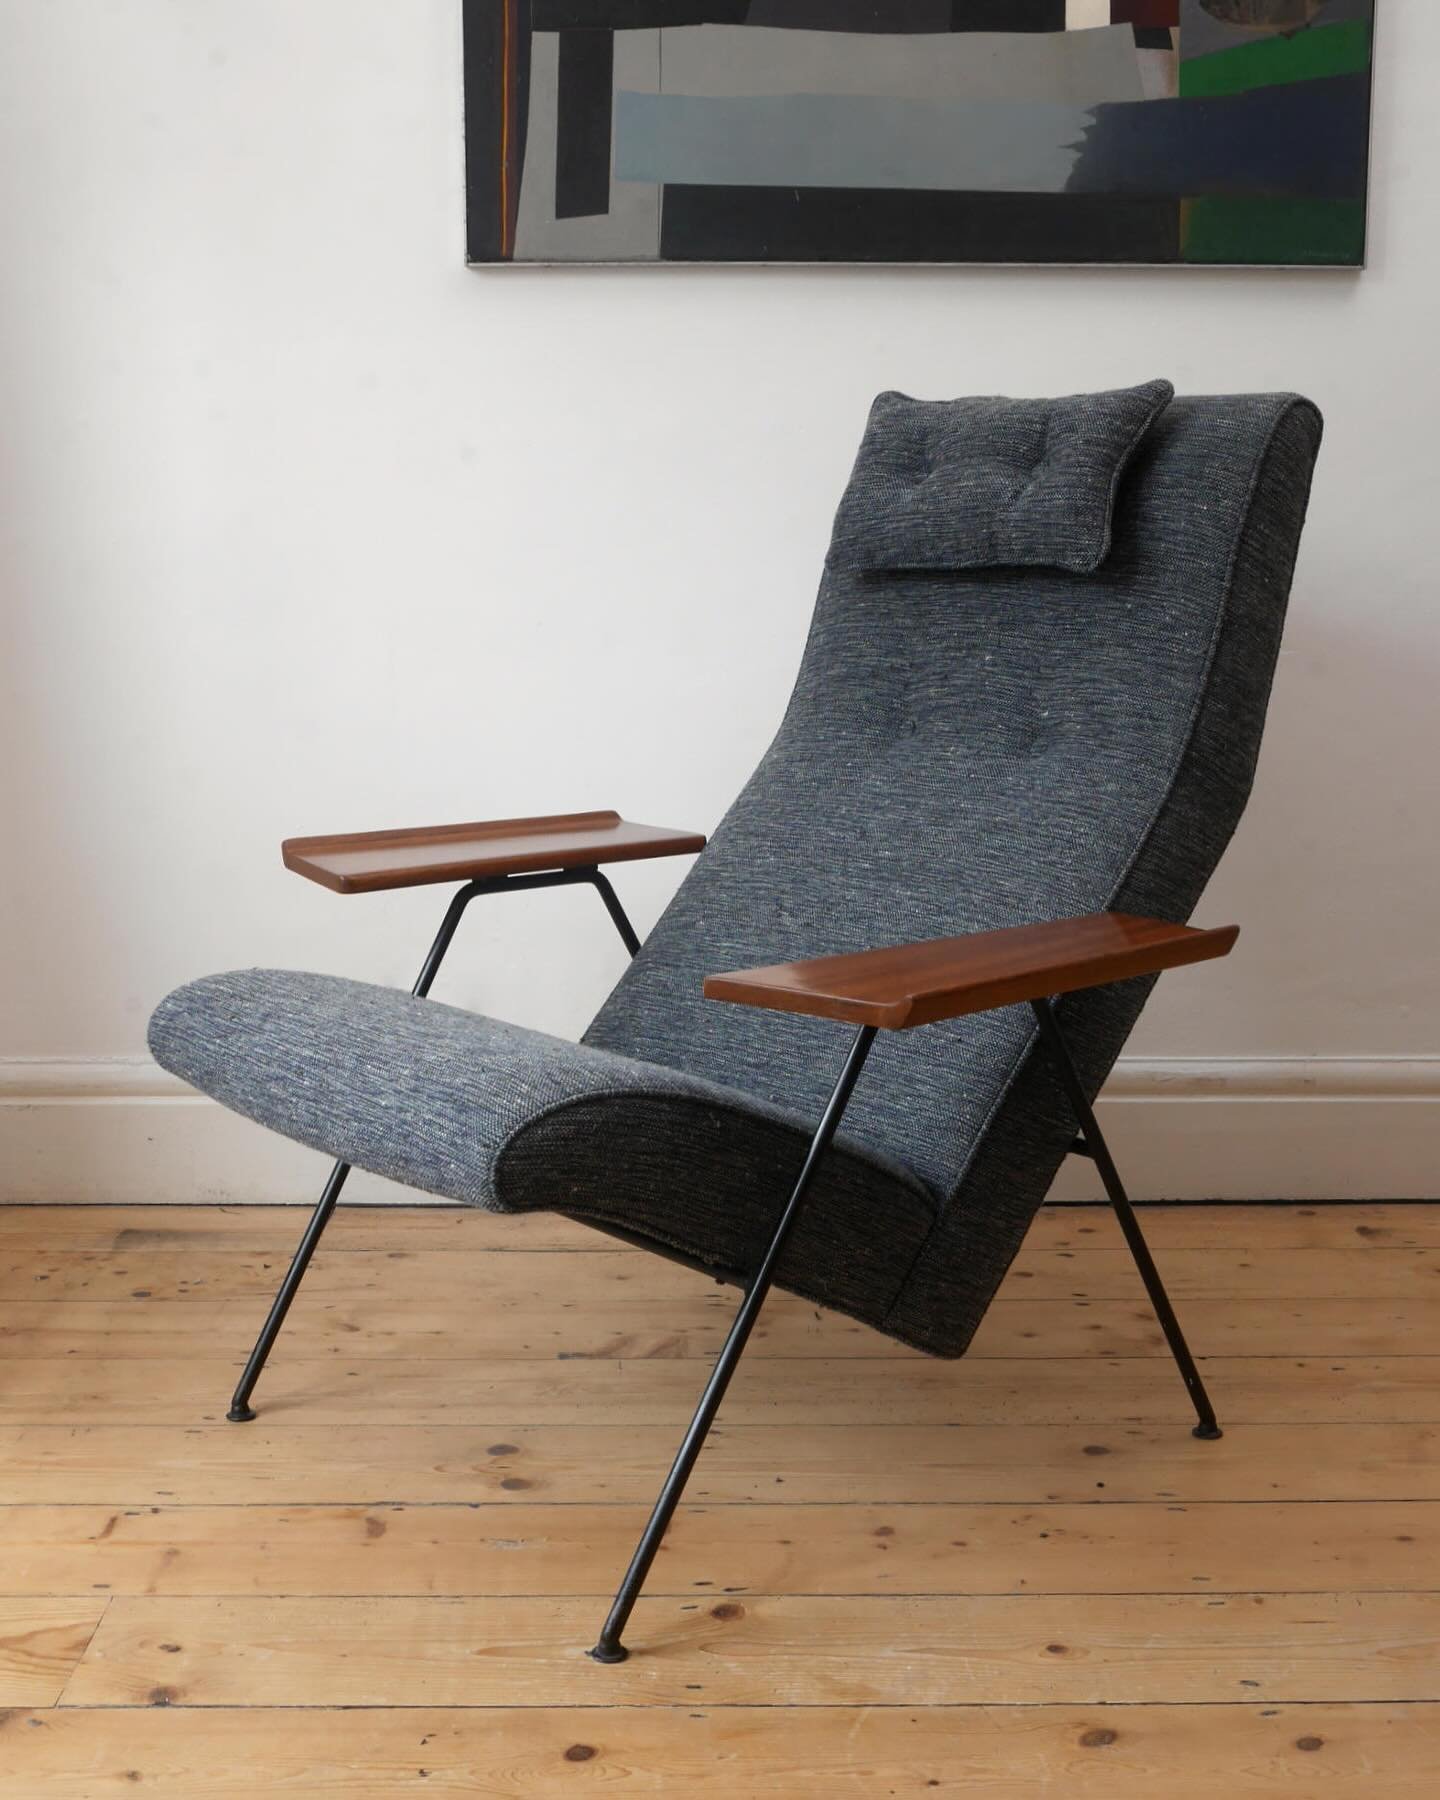 &lsquo;Reclining Chair&rsquo; by Robin Day, 1952. In the sale at &pound;1650 (was &pound;1950). Day considered this chair to be one of his most successful designs. 

Like much of Day&rsquo;s work the chair proudly shows its structure with metal angle